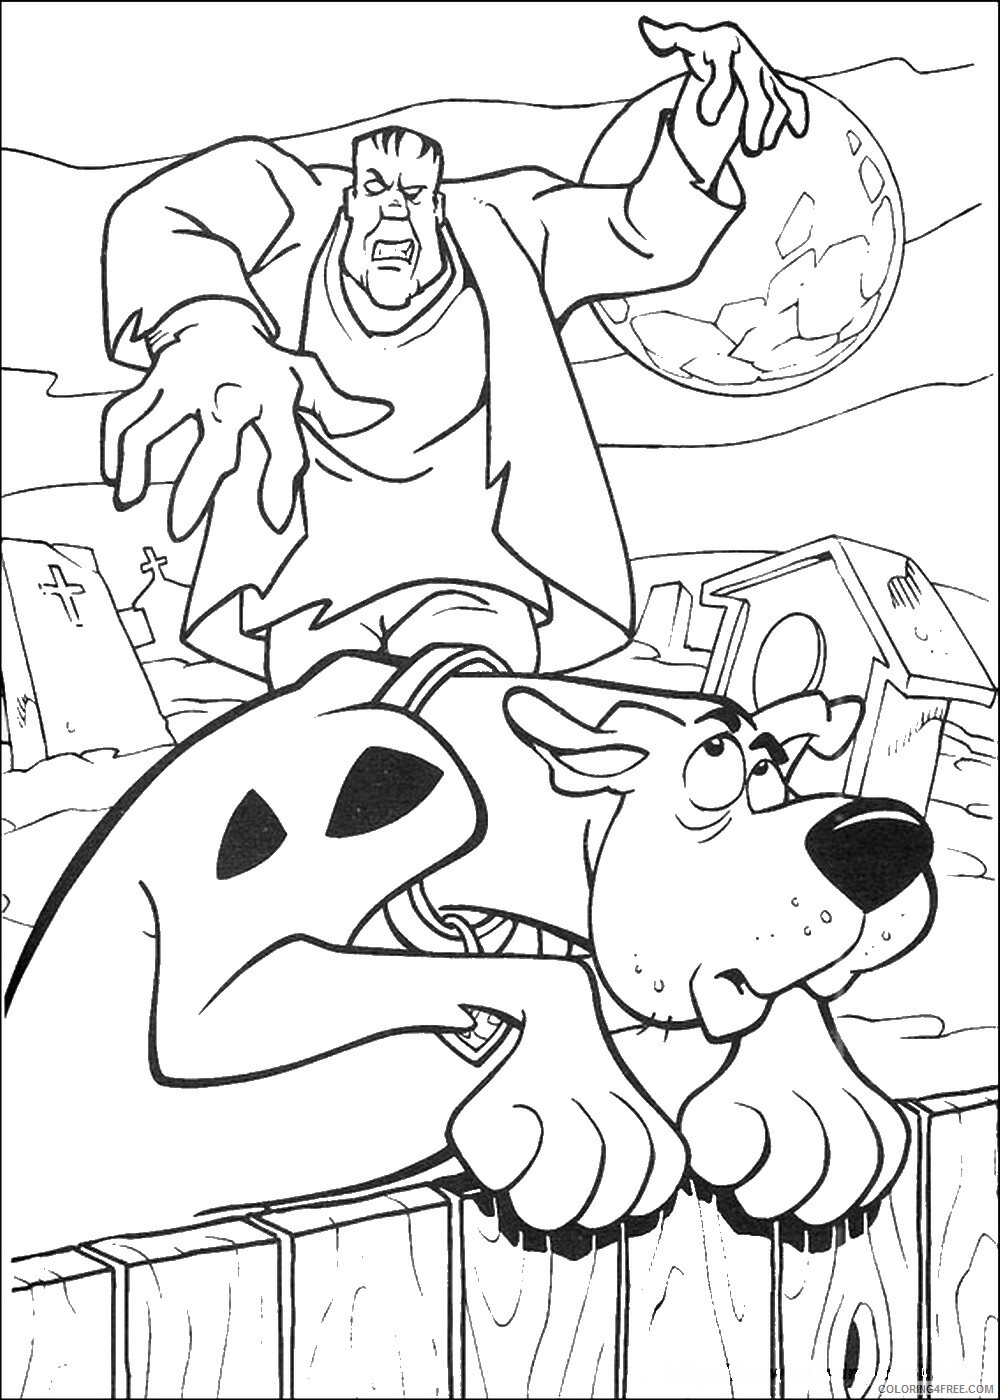 Scooby Doo Coloring Pages TV Film scooby_doo_cl_34 Printable 2020 07277 Coloring4free